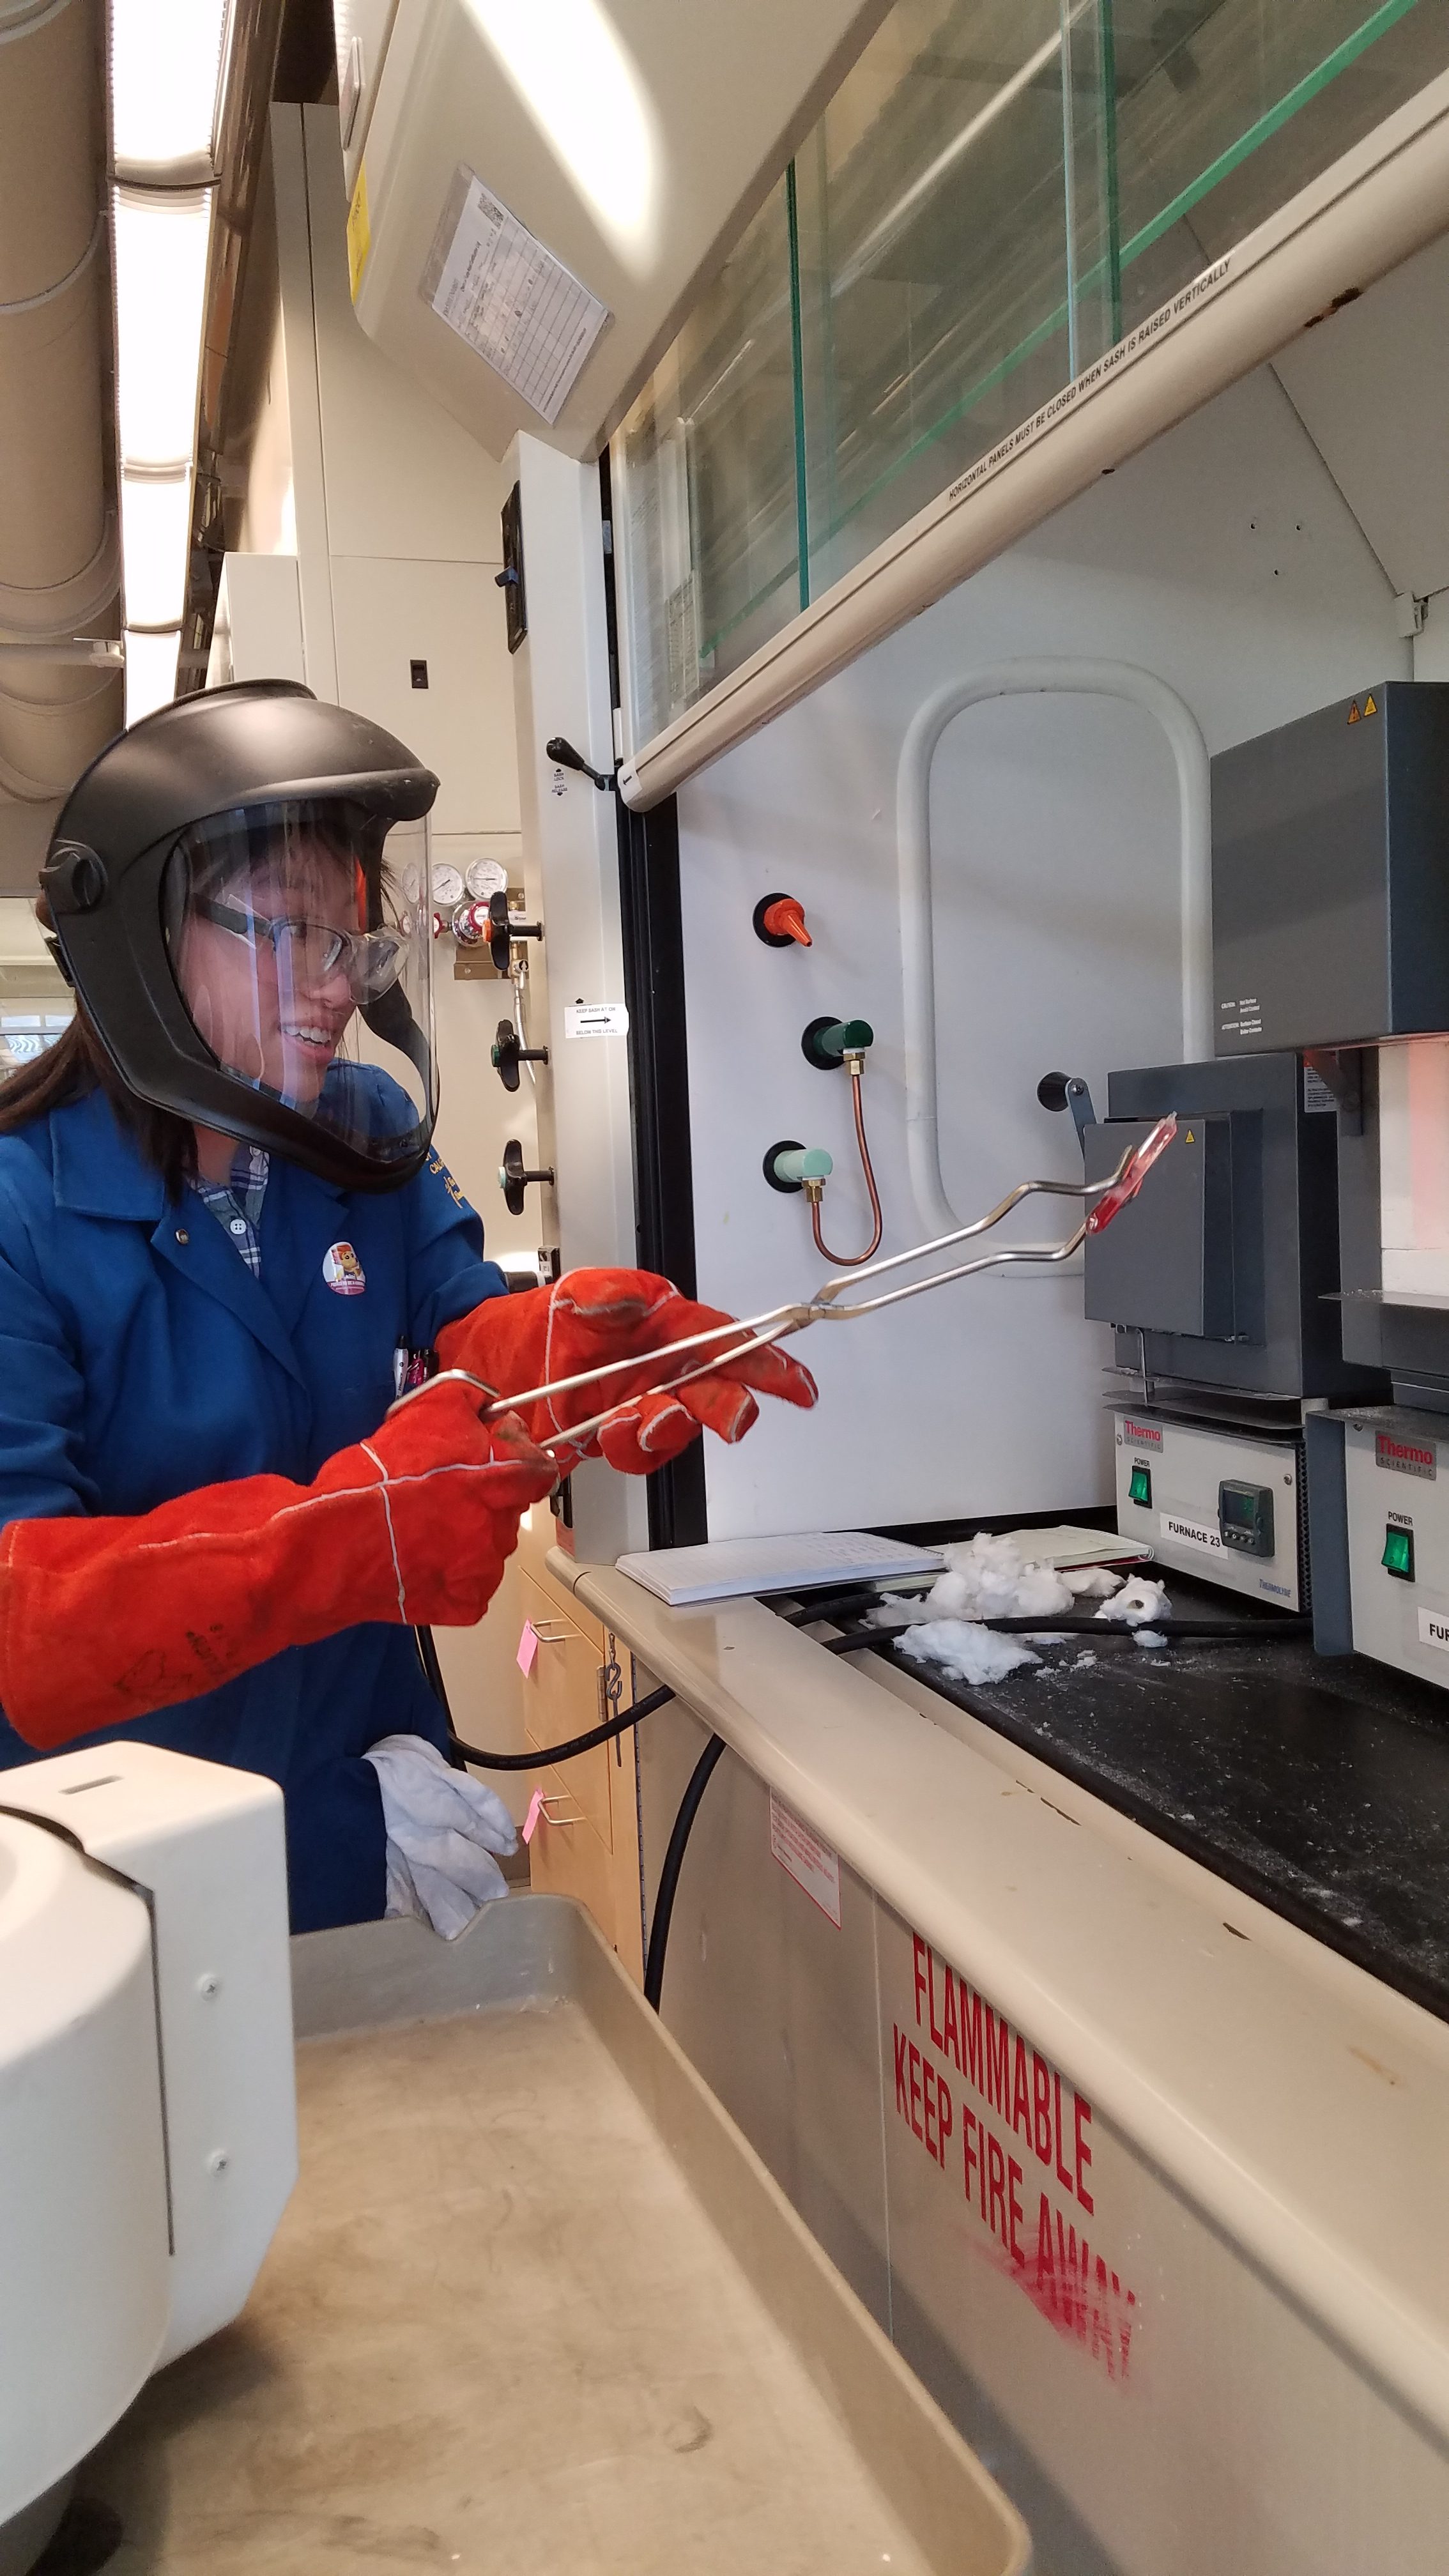 Katherine wears temperature protective gear and handles an item under the fumehood with tongs.